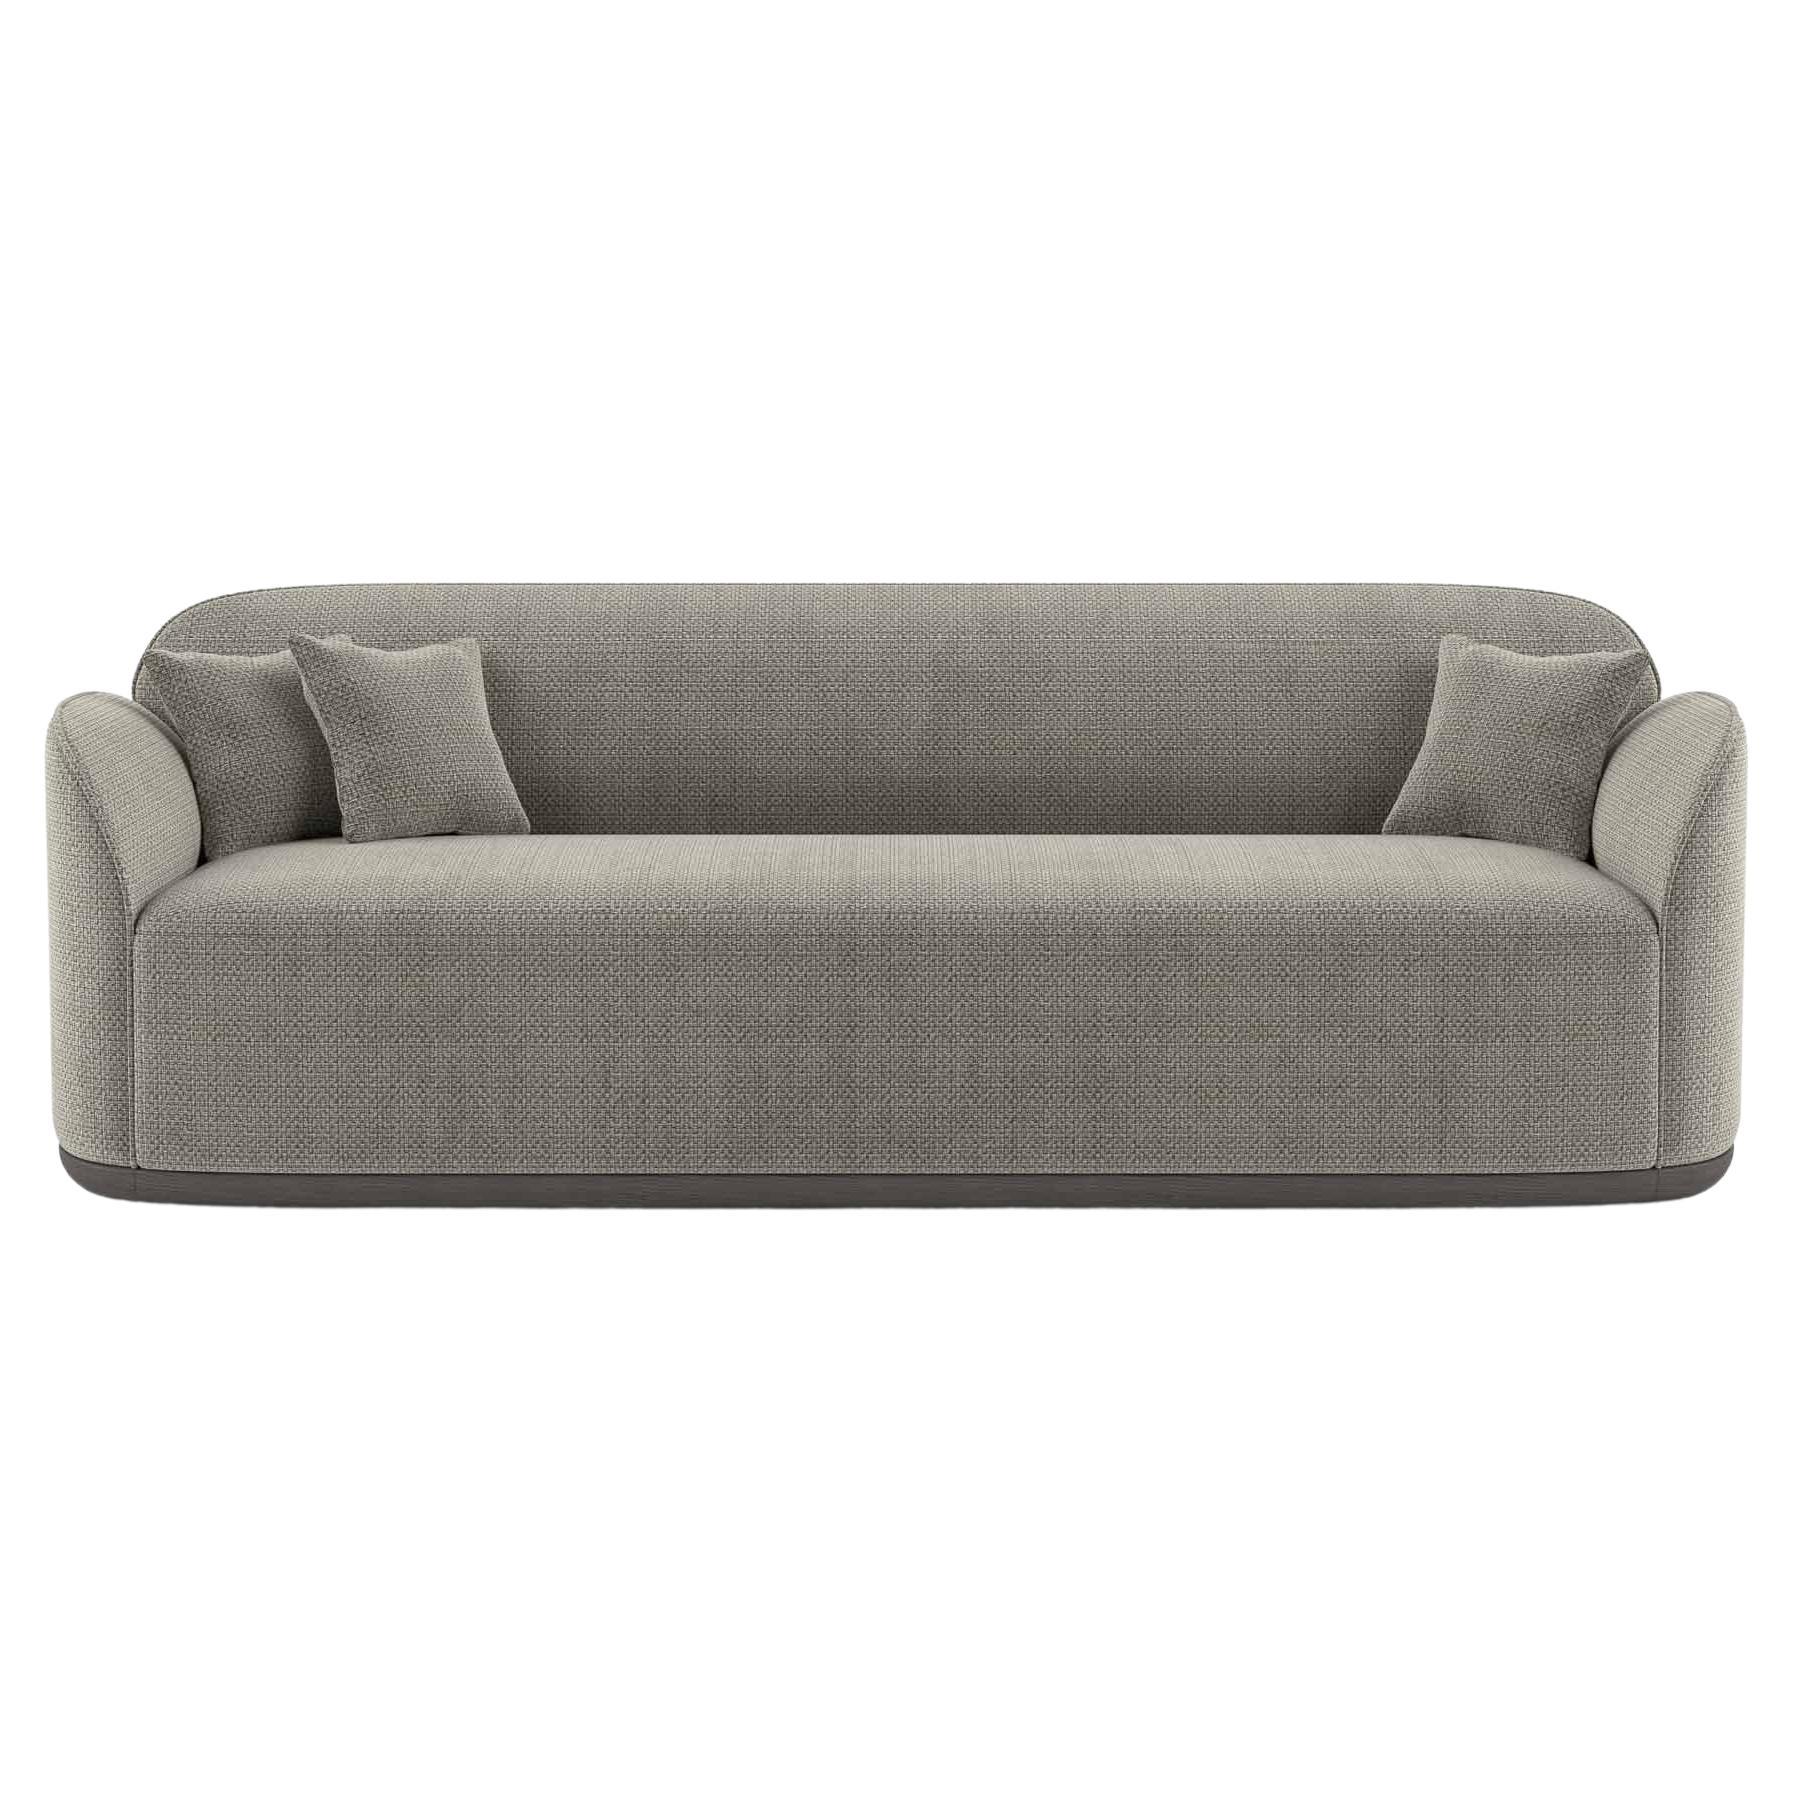 Unio Sofa Upholstered with Pierre Frey Hanoi Fabric by Poiat